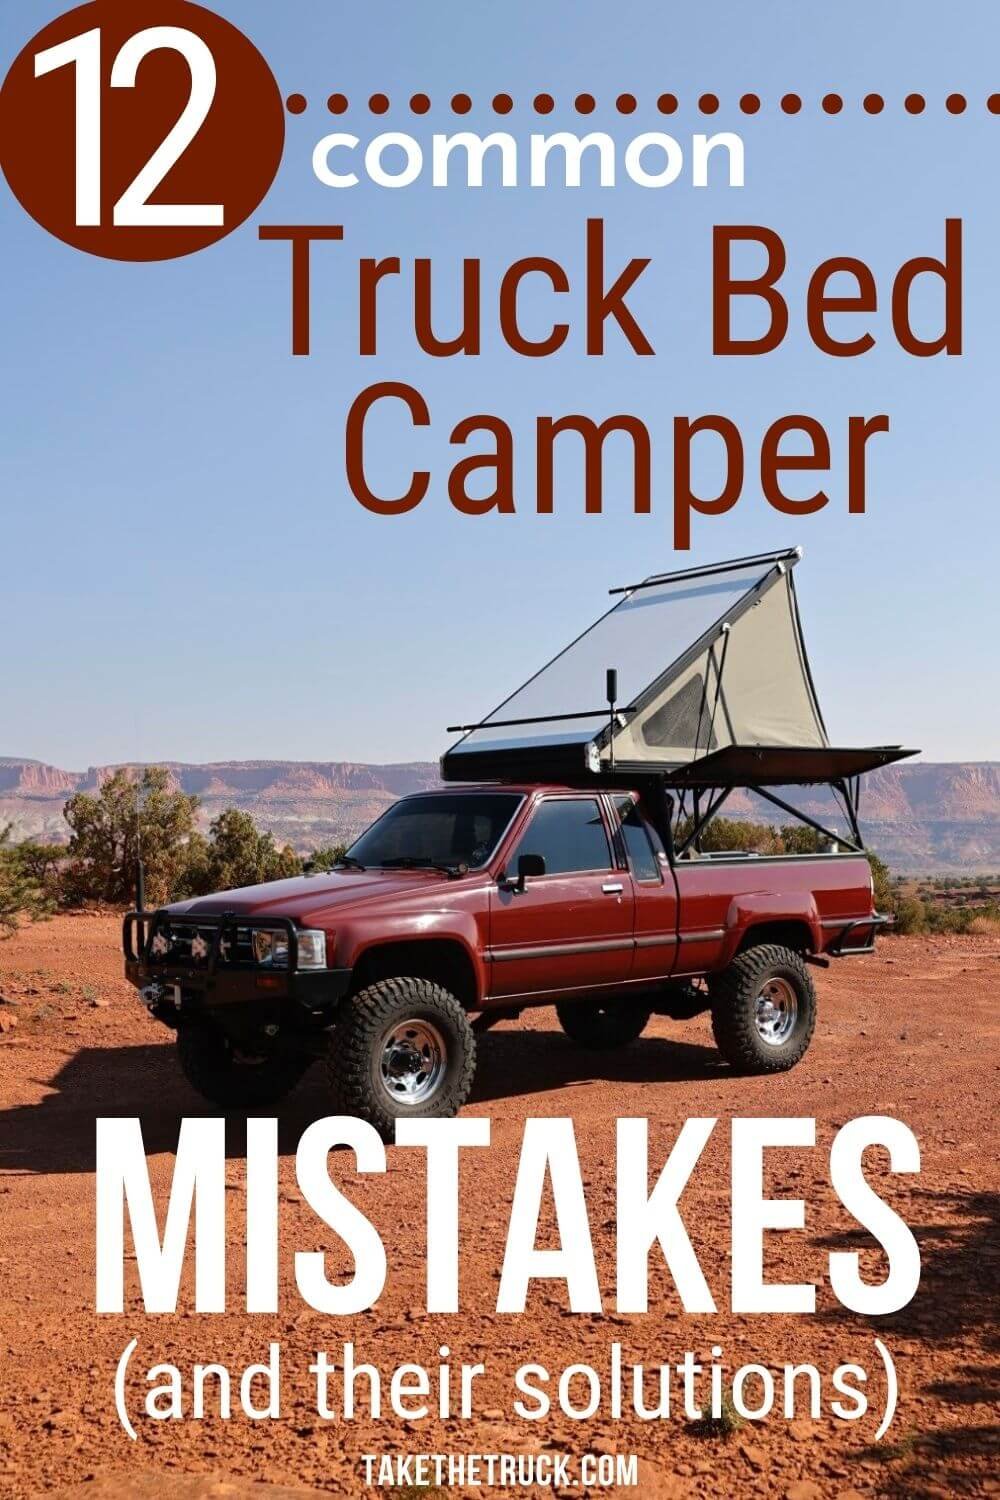 About to build your own truck bed camper? Check out this post first for 12 common mistakes you’ll want to avoid in your diy truck bed camper build. Start truck topper camping like a pro!